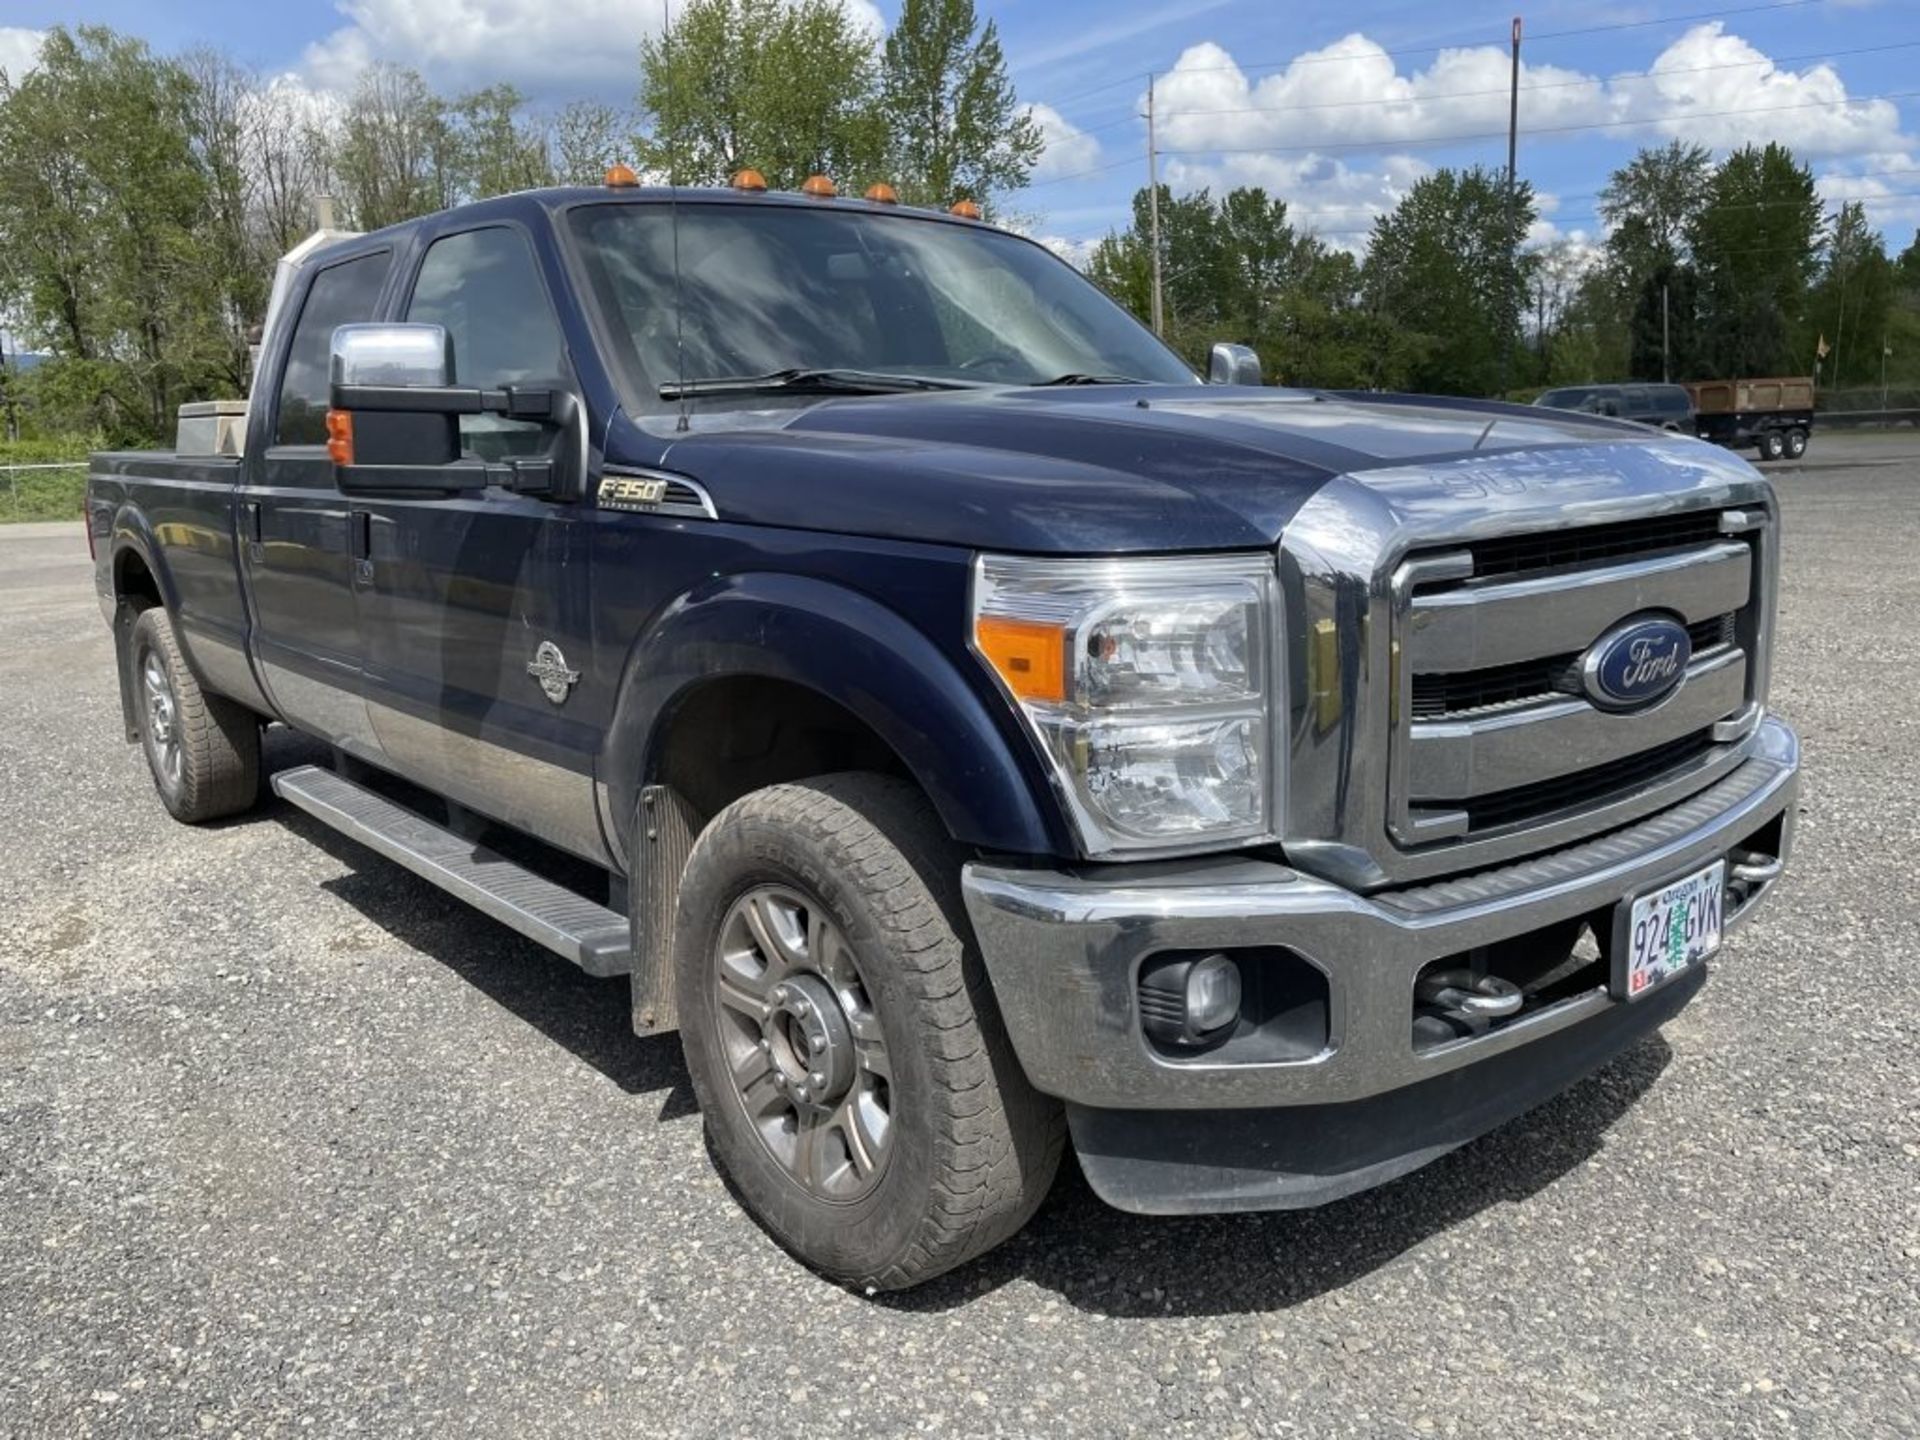 2014 Ford F350 SD Crew Cab 4x4 Pickup - Image 2 of 47